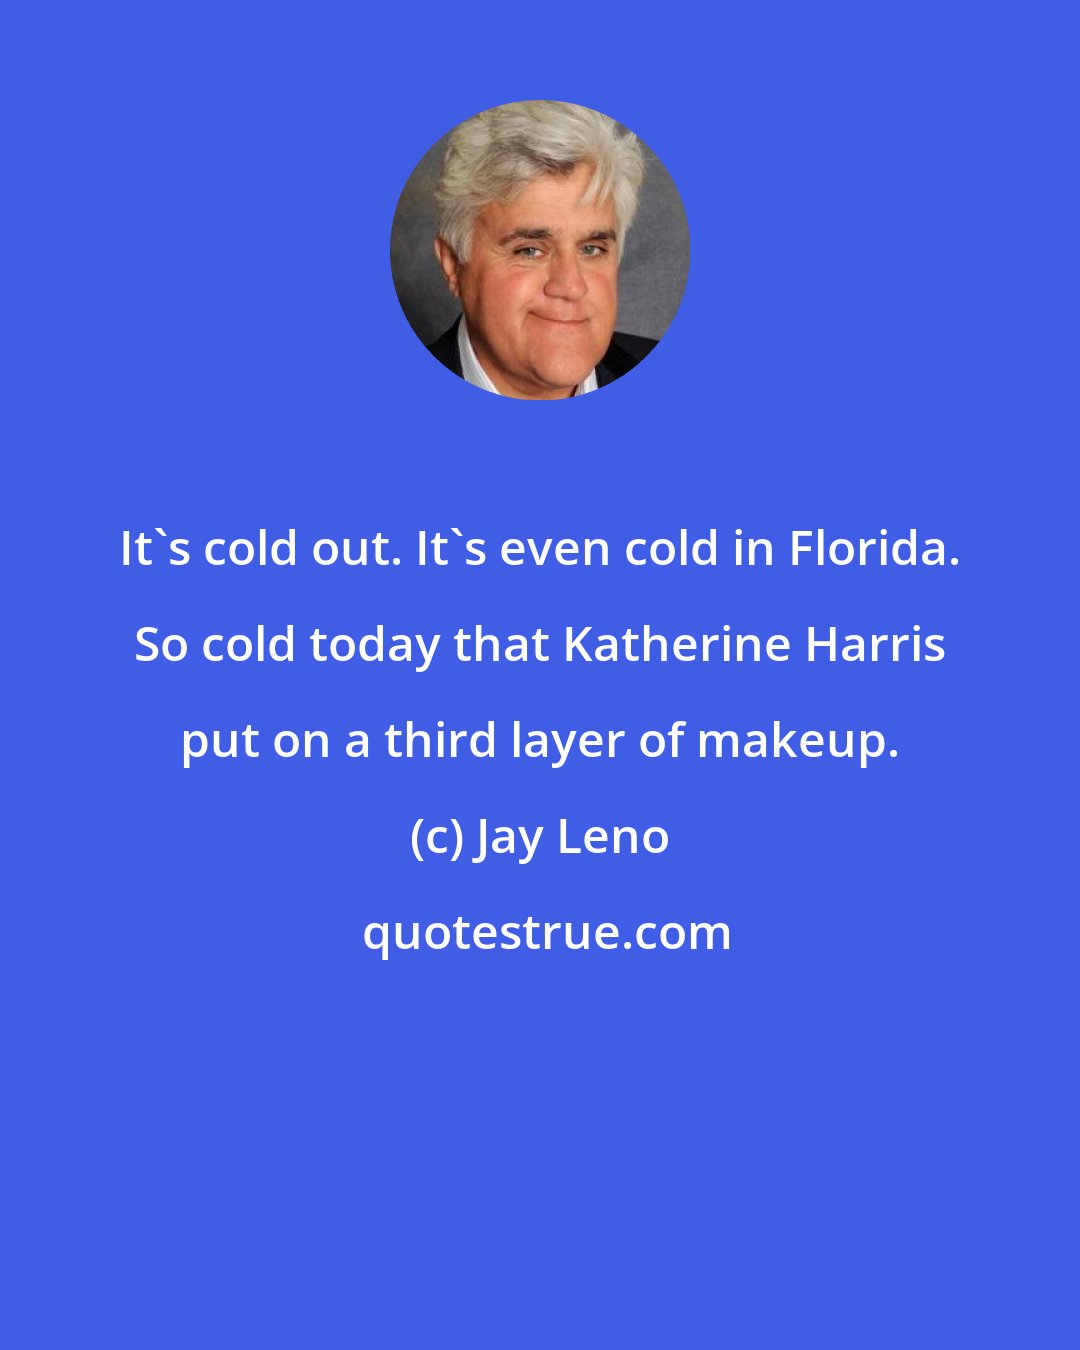 Jay Leno: It's cold out. It's even cold in Florida. So cold today that Katherine Harris put on a third layer of makeup.